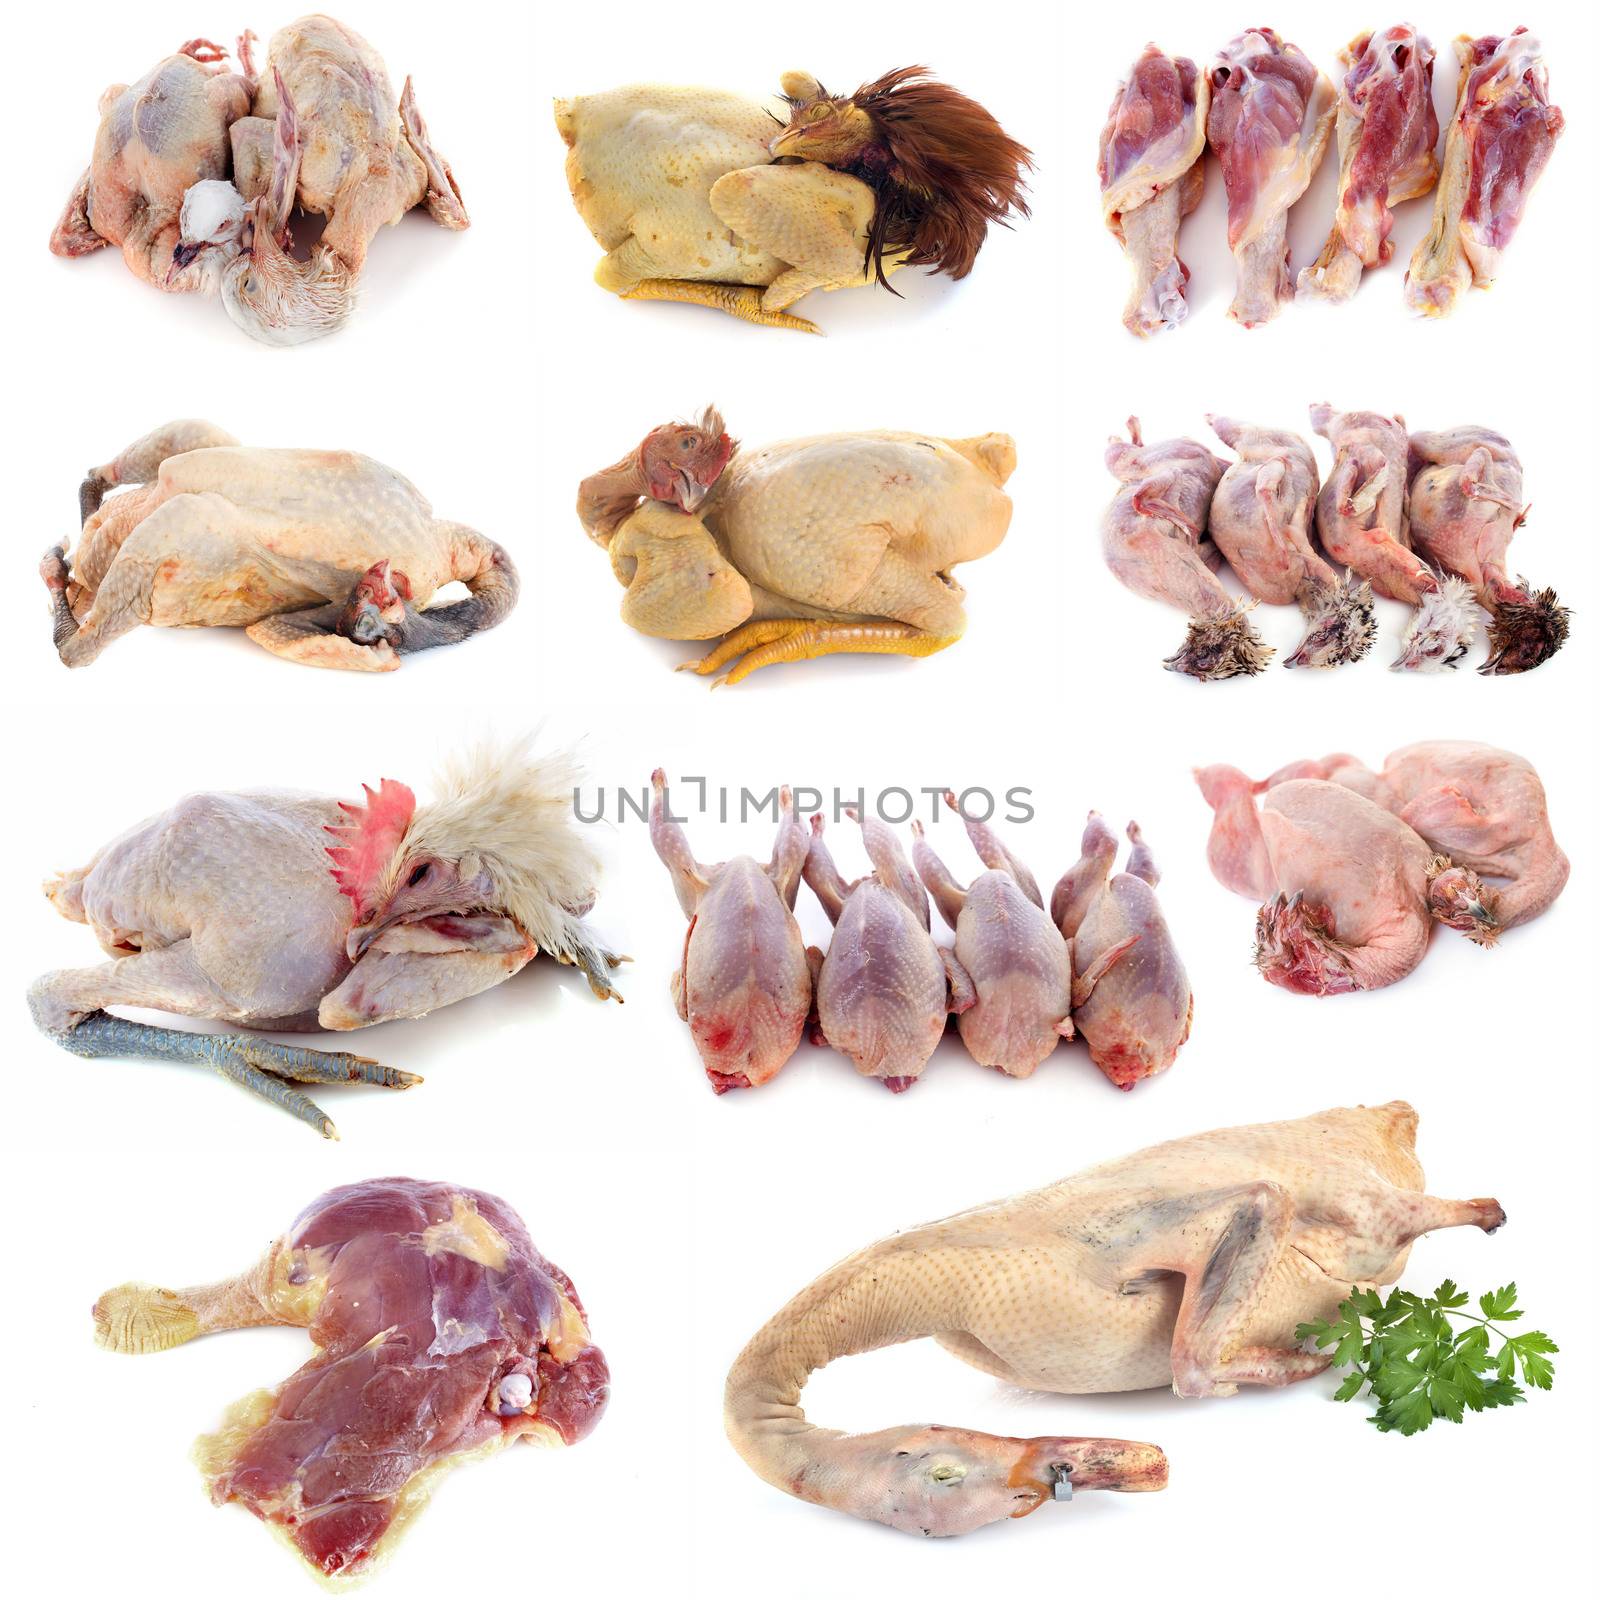 poultry meat in front of white background